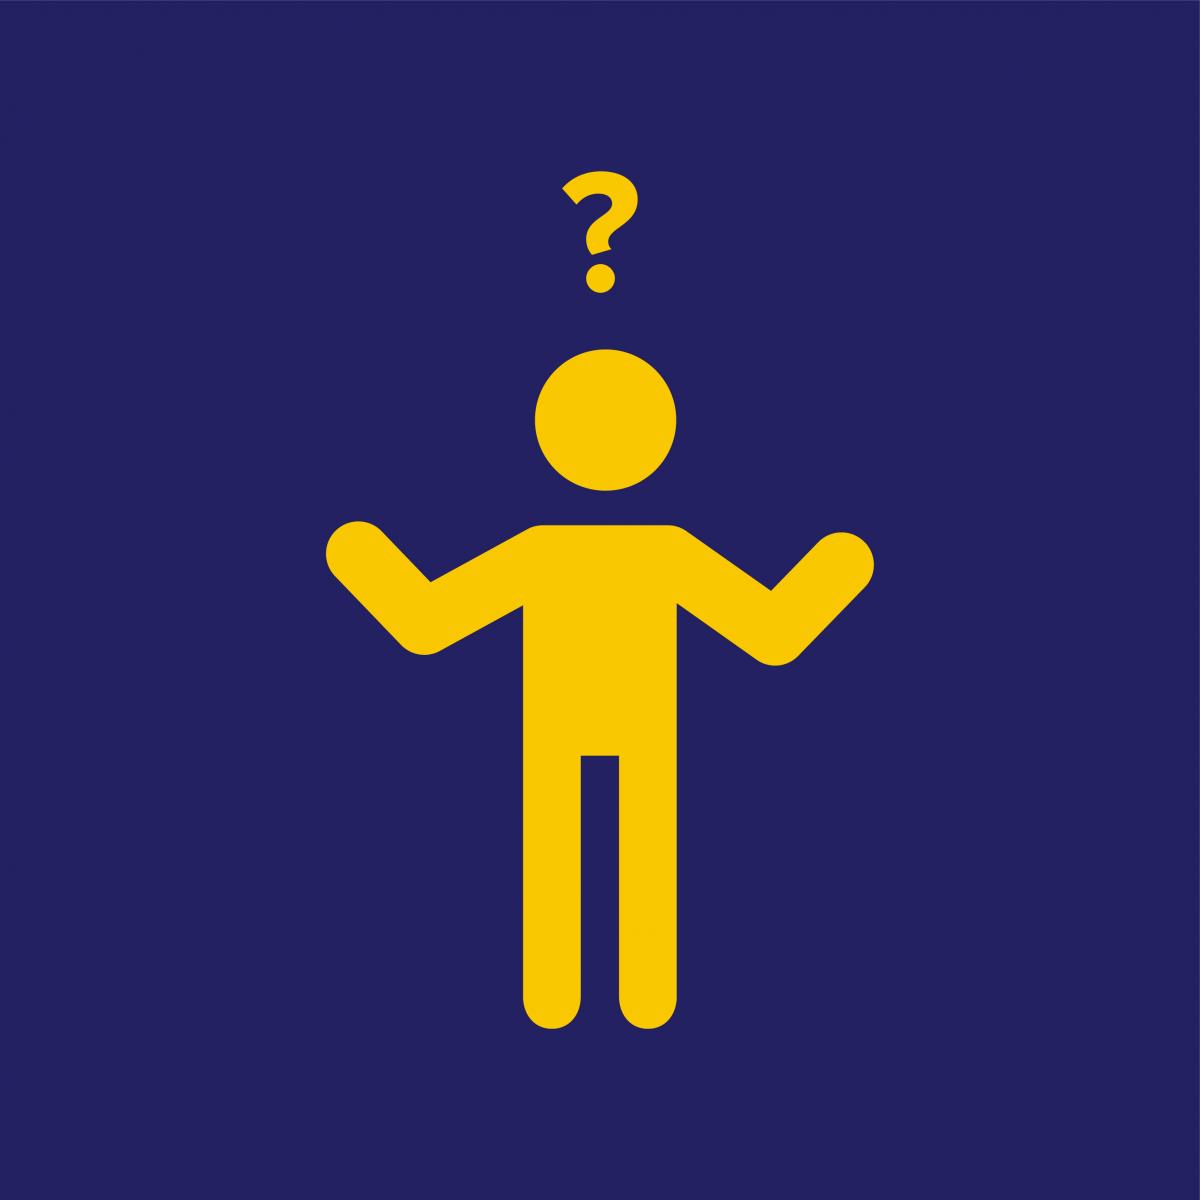 Yellow person shruging with a question mark over their head.